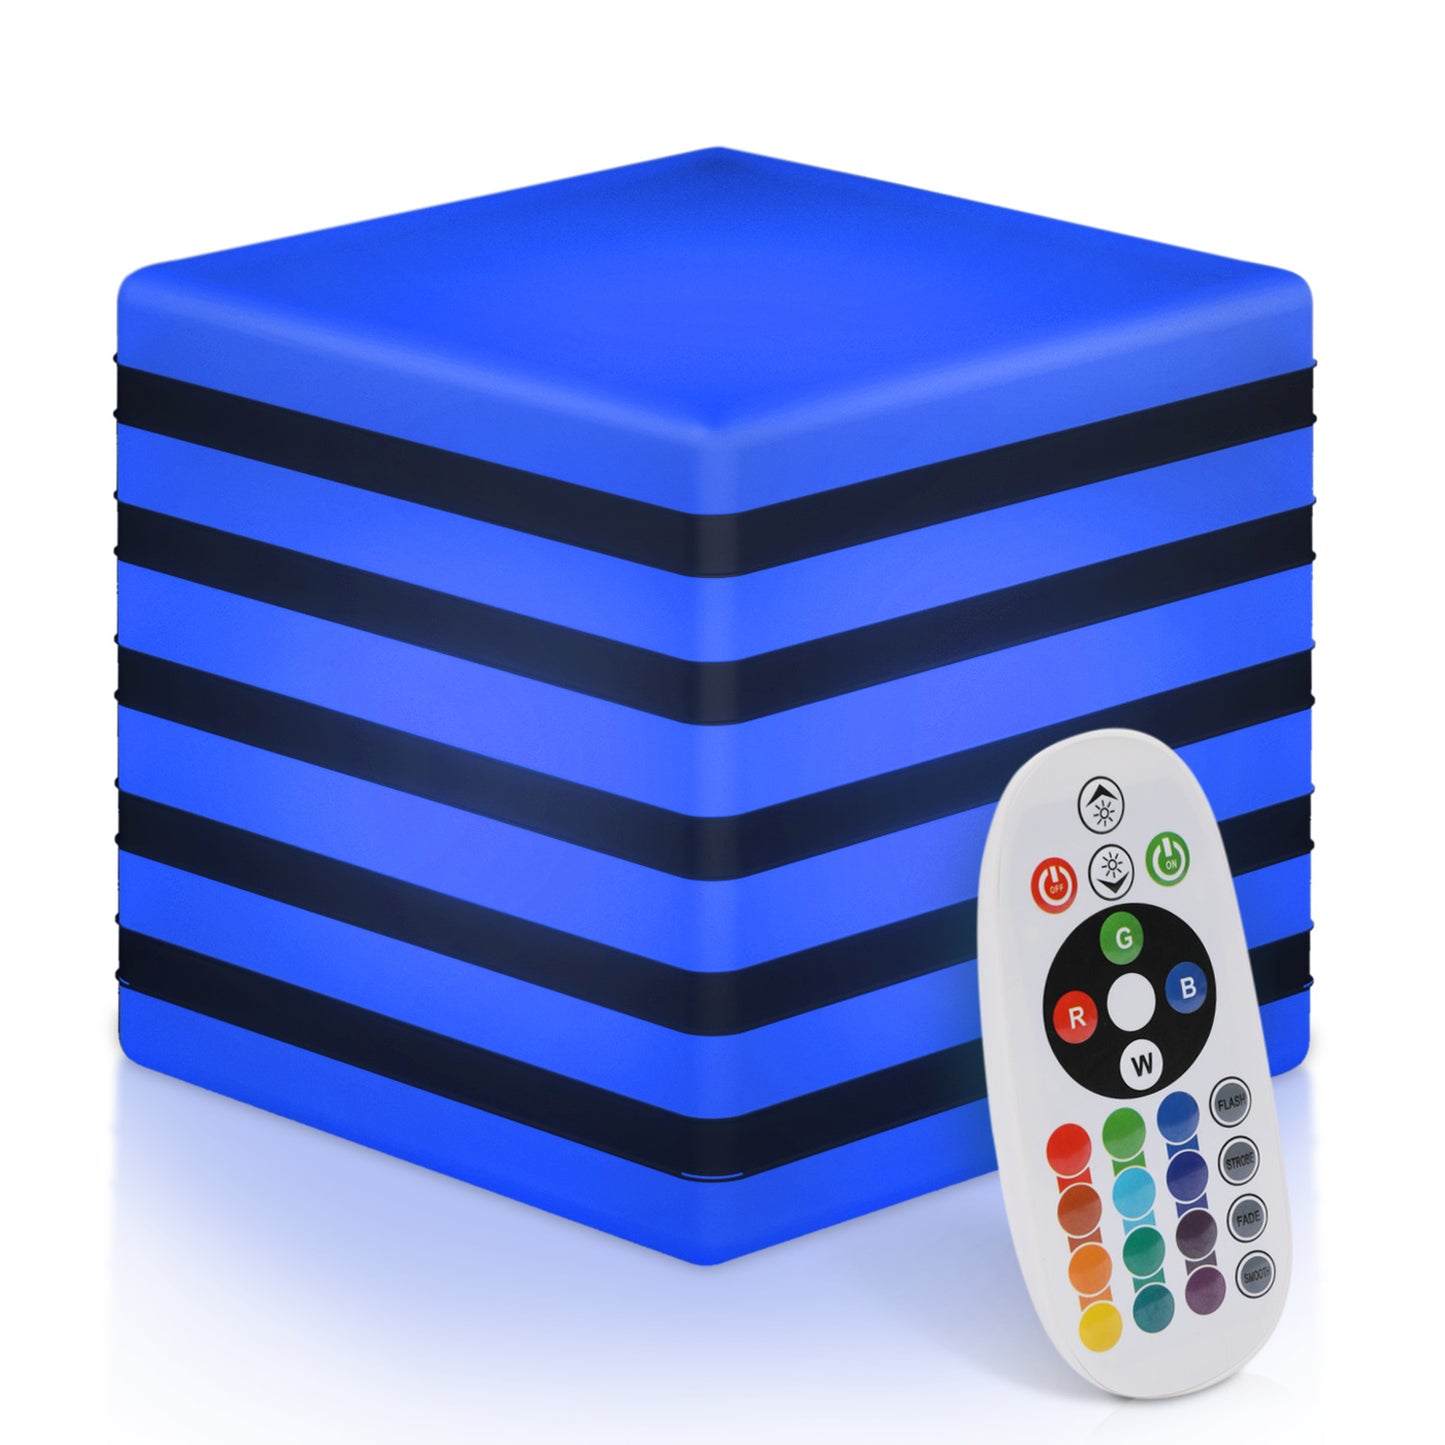 LED - Stool - 16''Cube with Striped - 16 Colors Remote Control